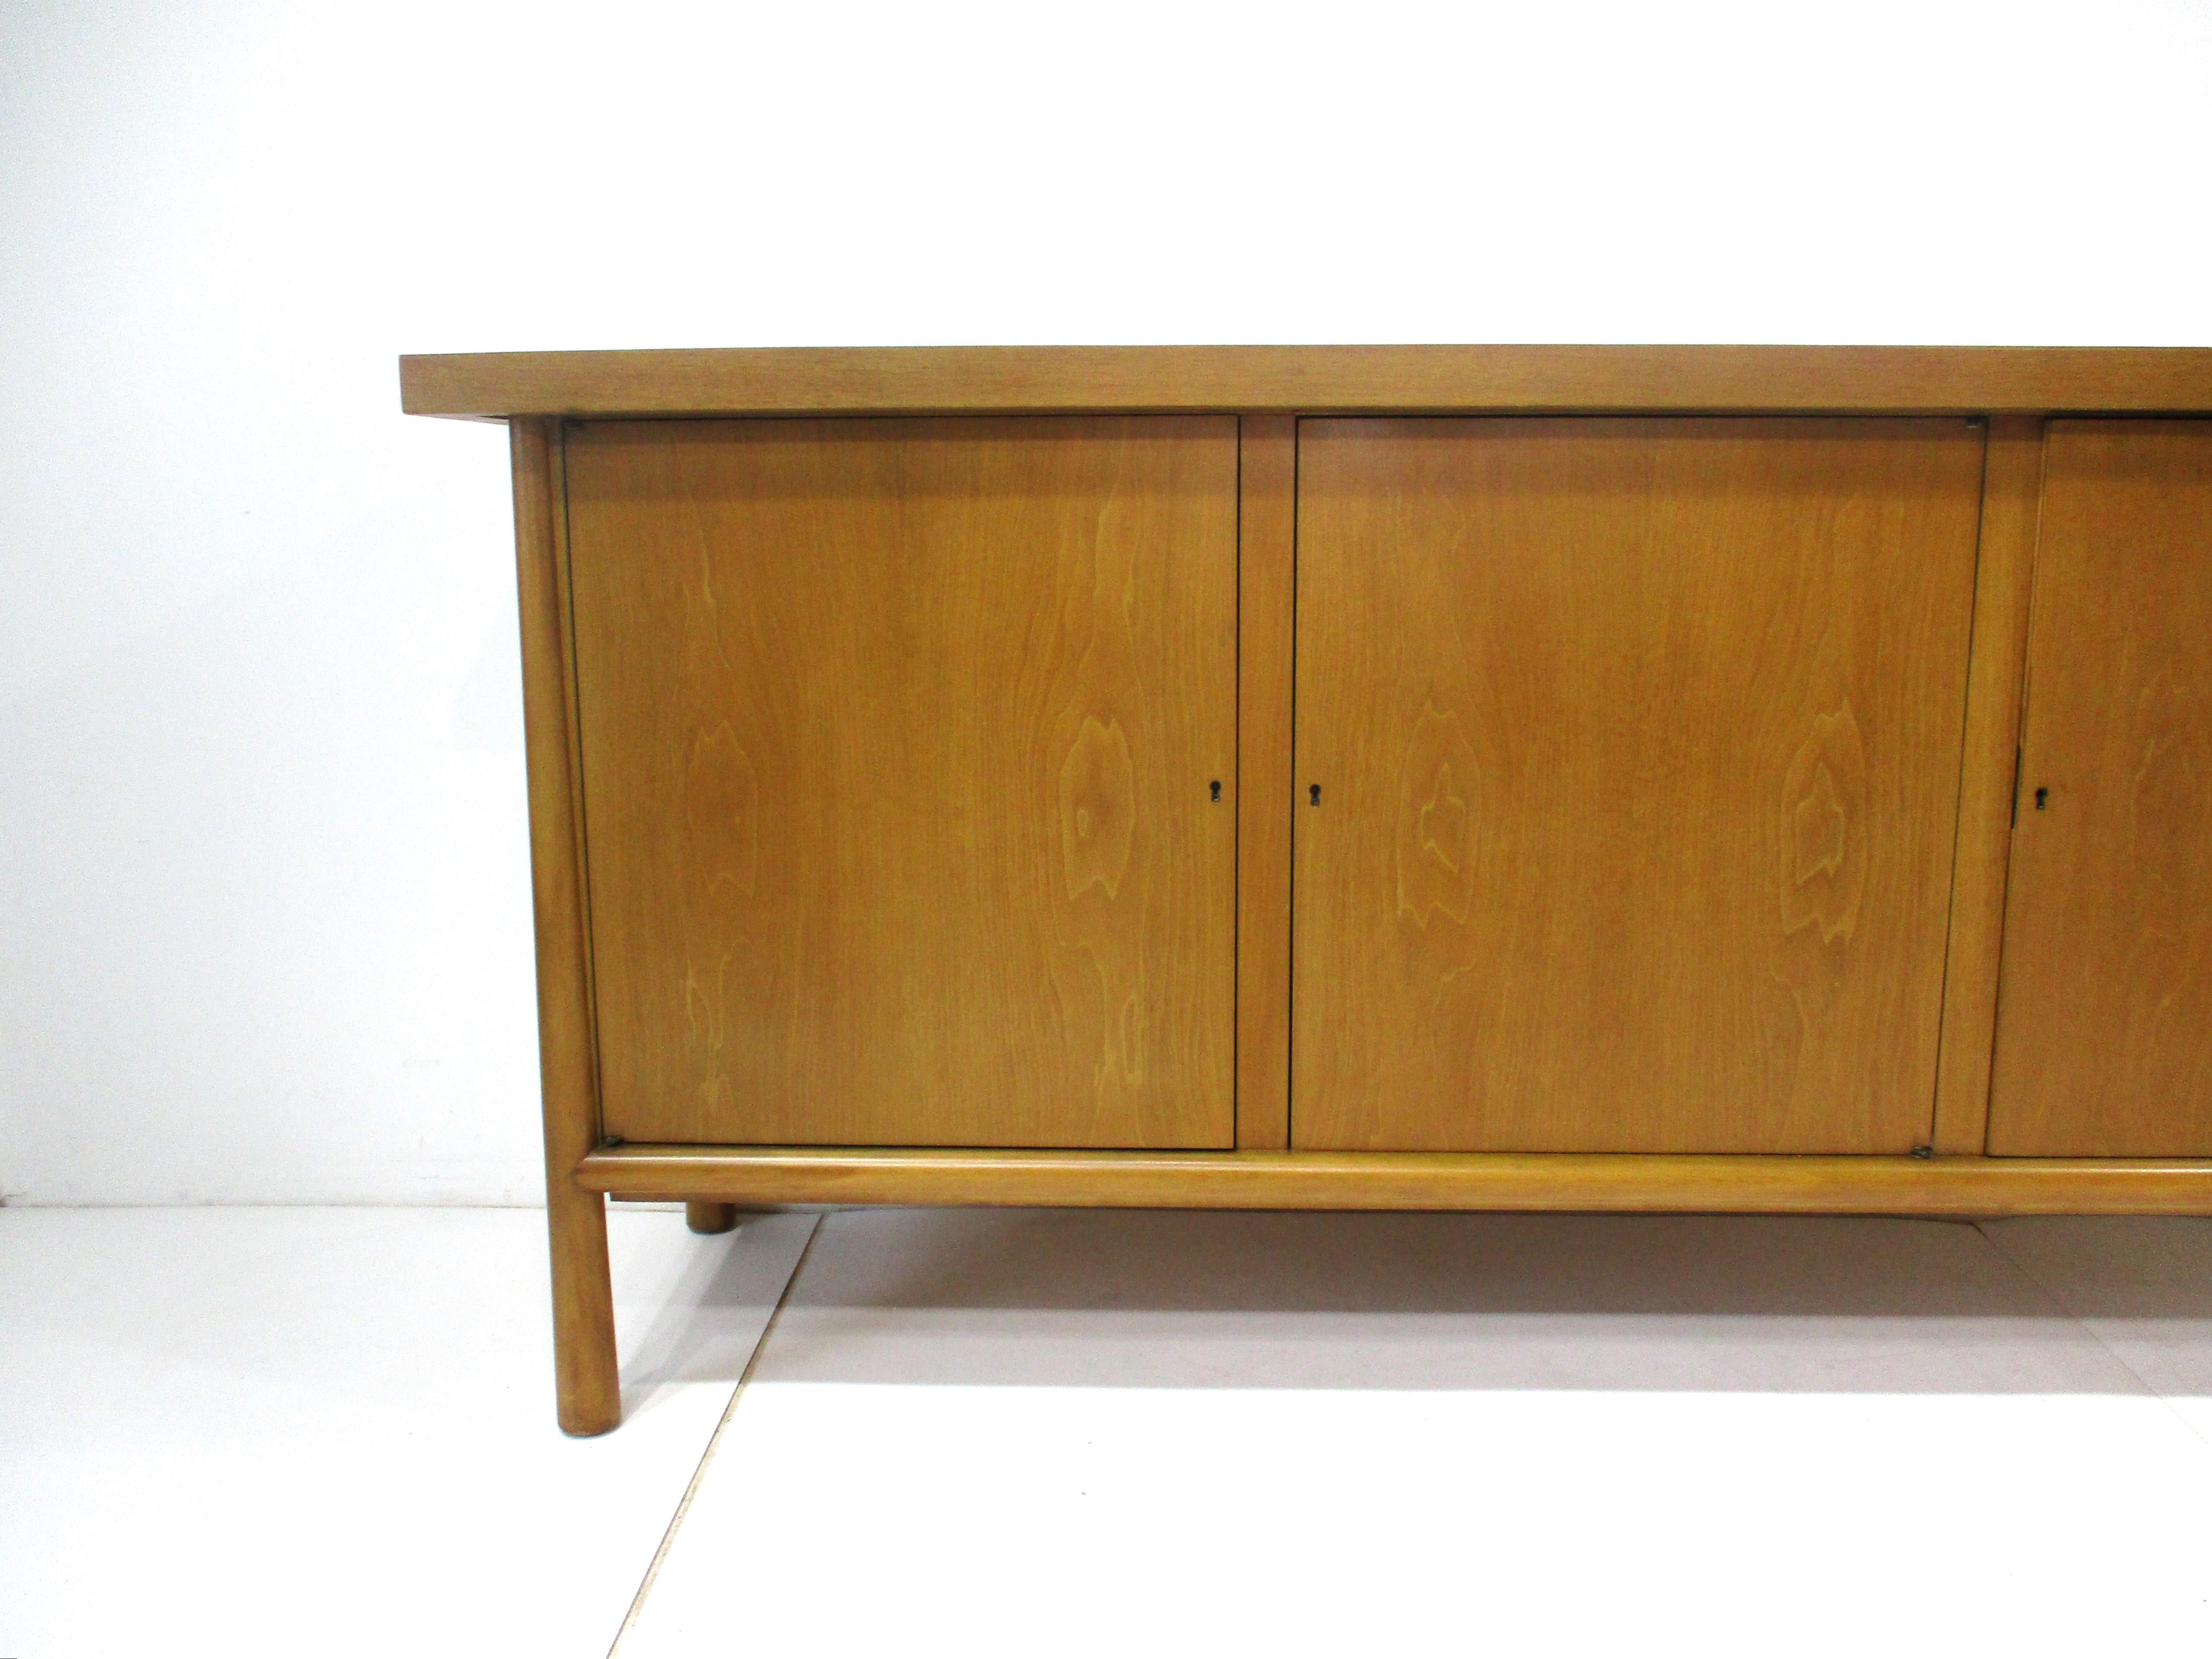 A very well crafted honey toned mahogany three door Ming sideboard or credenza , to each side door there is one adjustable shelve and to the center section four drawers , the top and bottom drawer have open storage and the center two have dividers